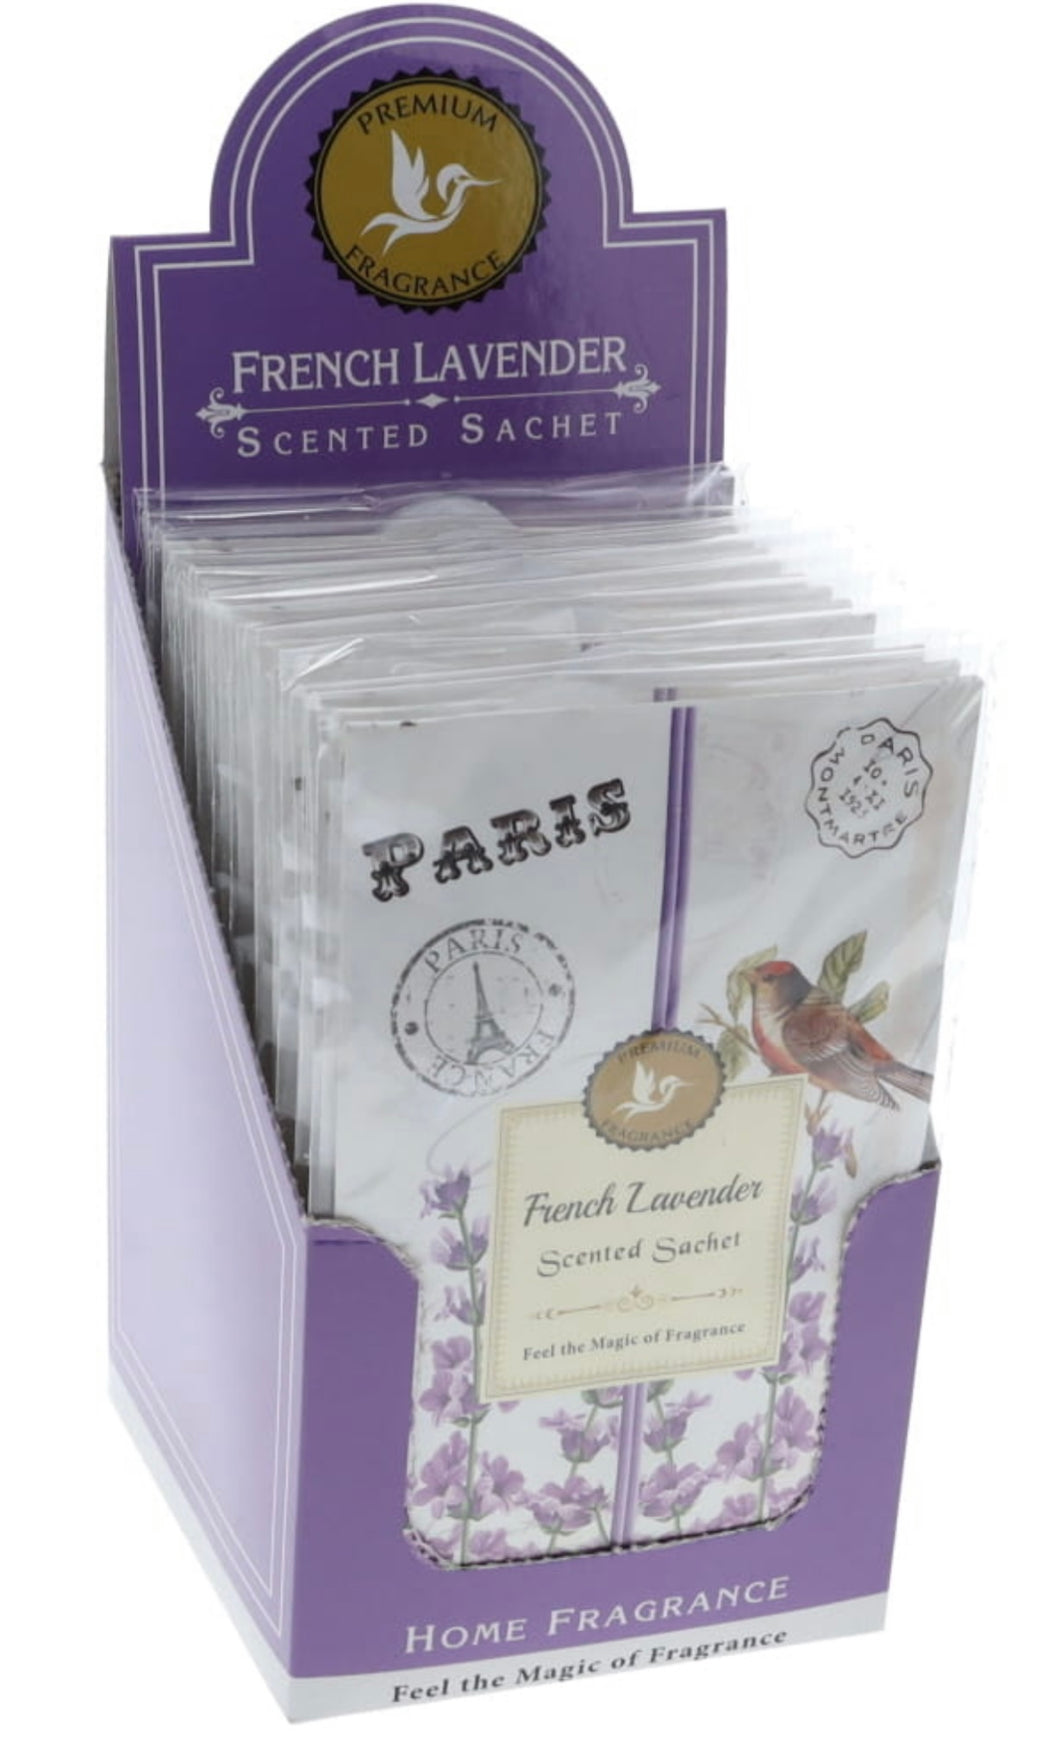 French Lavender - Scented Sachet